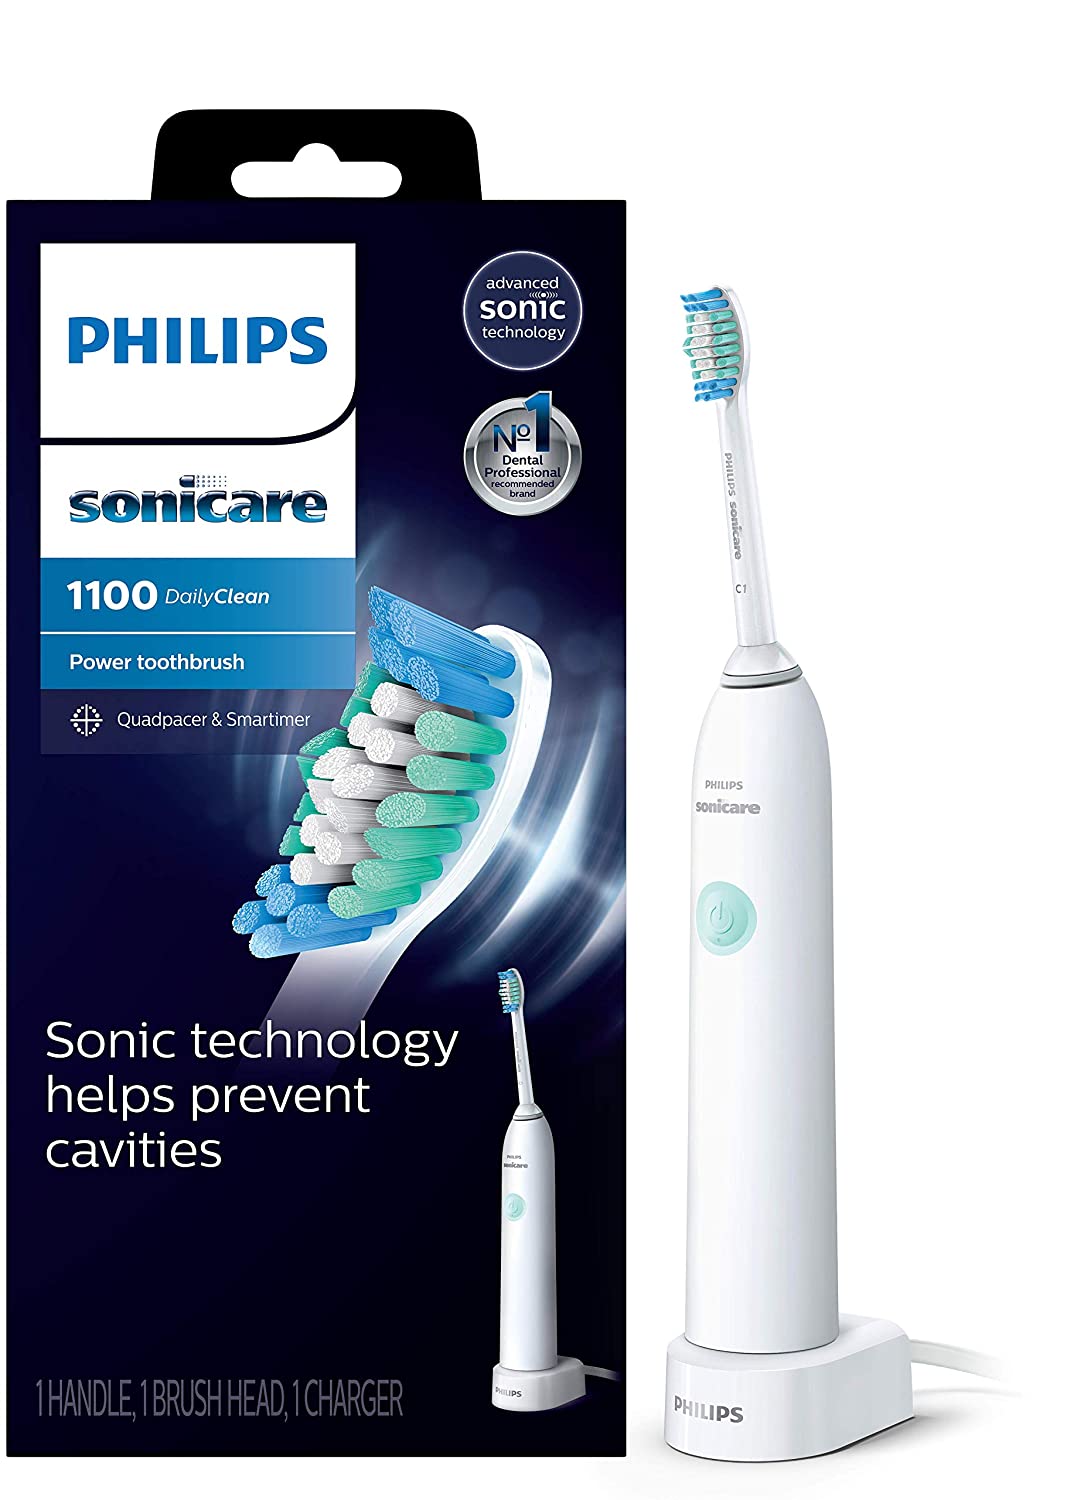 Philips Sonicare DailyClean 1100 Rechargeable Electric Toothbrush, White HX3411/04